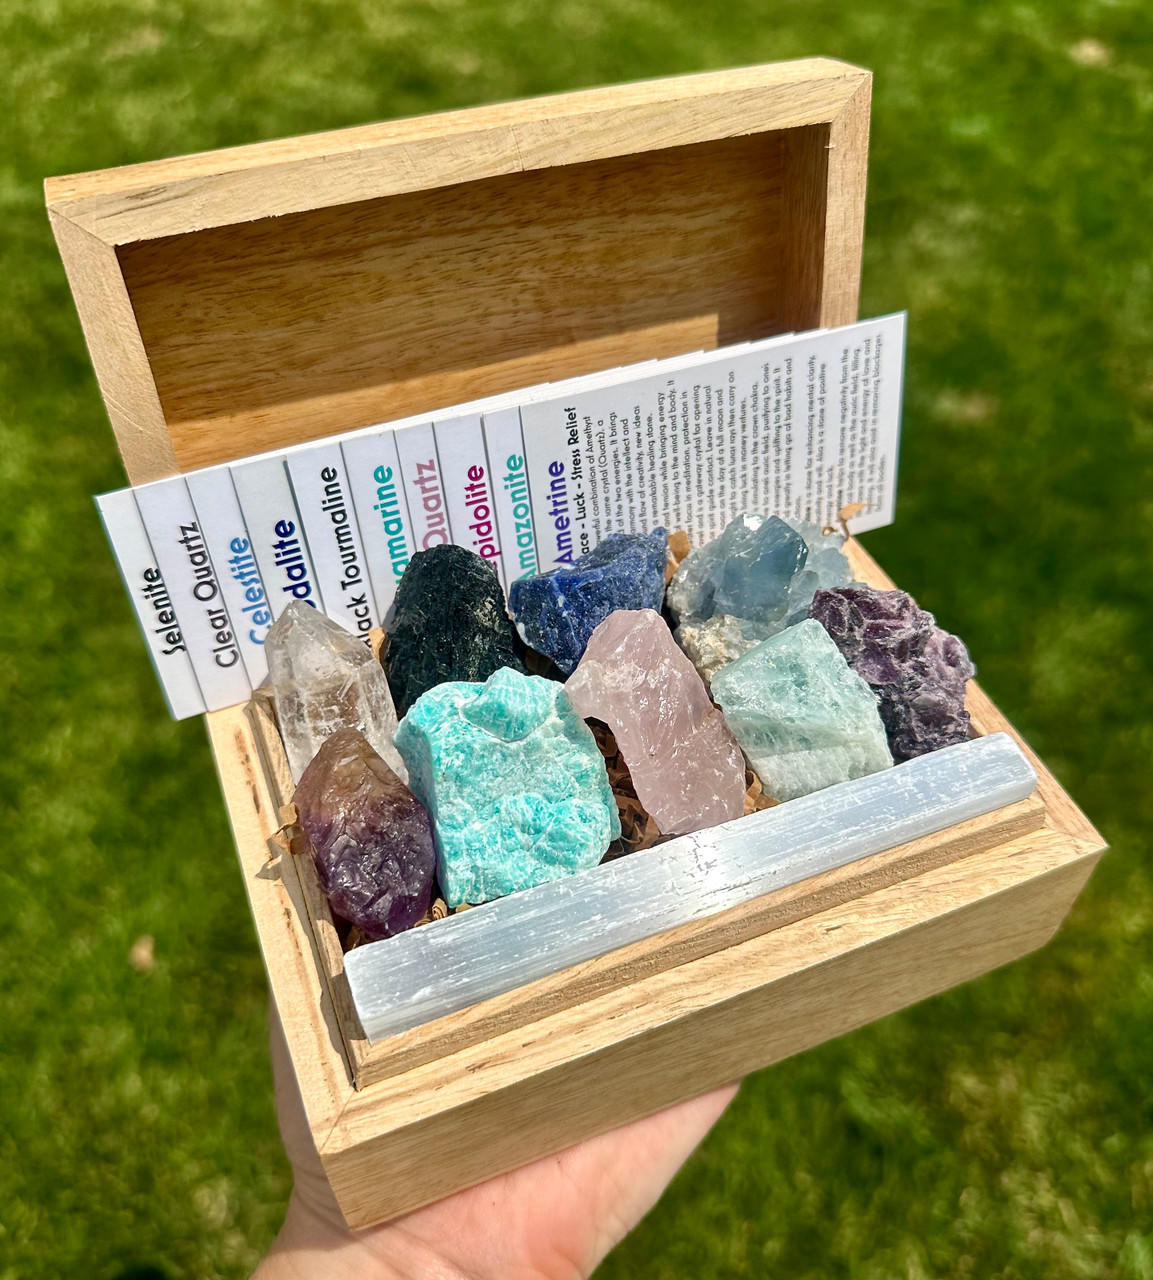 Worry and Stress Crystal Box Healing Crystals and Stone Set Calming and  Tranquility Raw Crystals Crystal Gift Box Starter Kit 15 